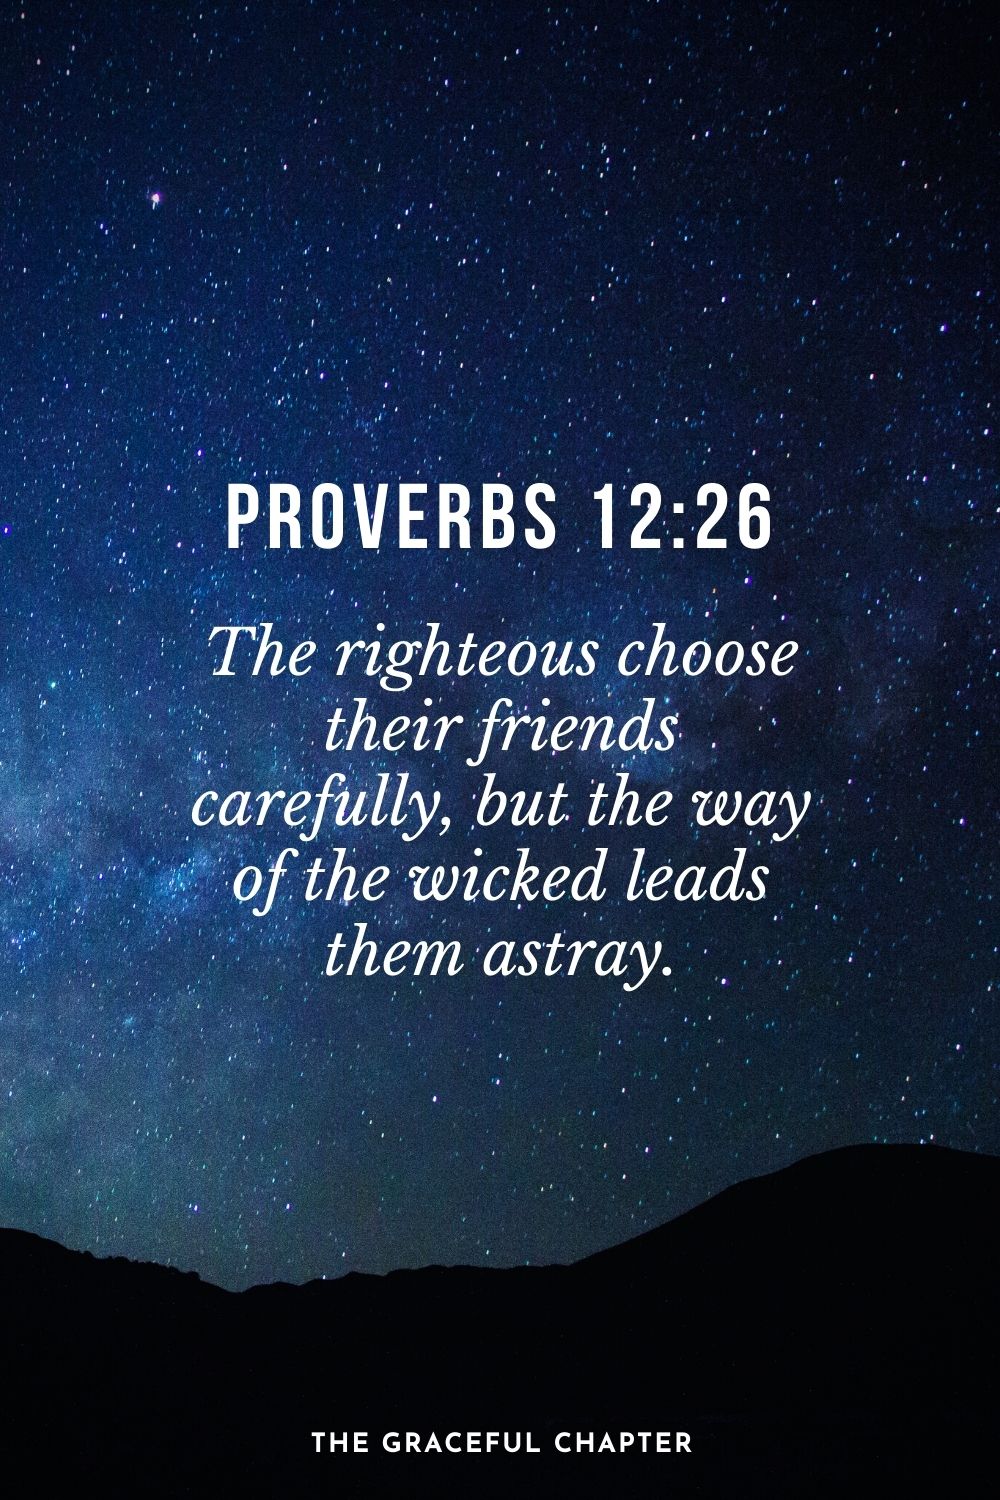 The righteous choose their friends carefully, but the way of the wicked leads them astray. Proverbs 12:26